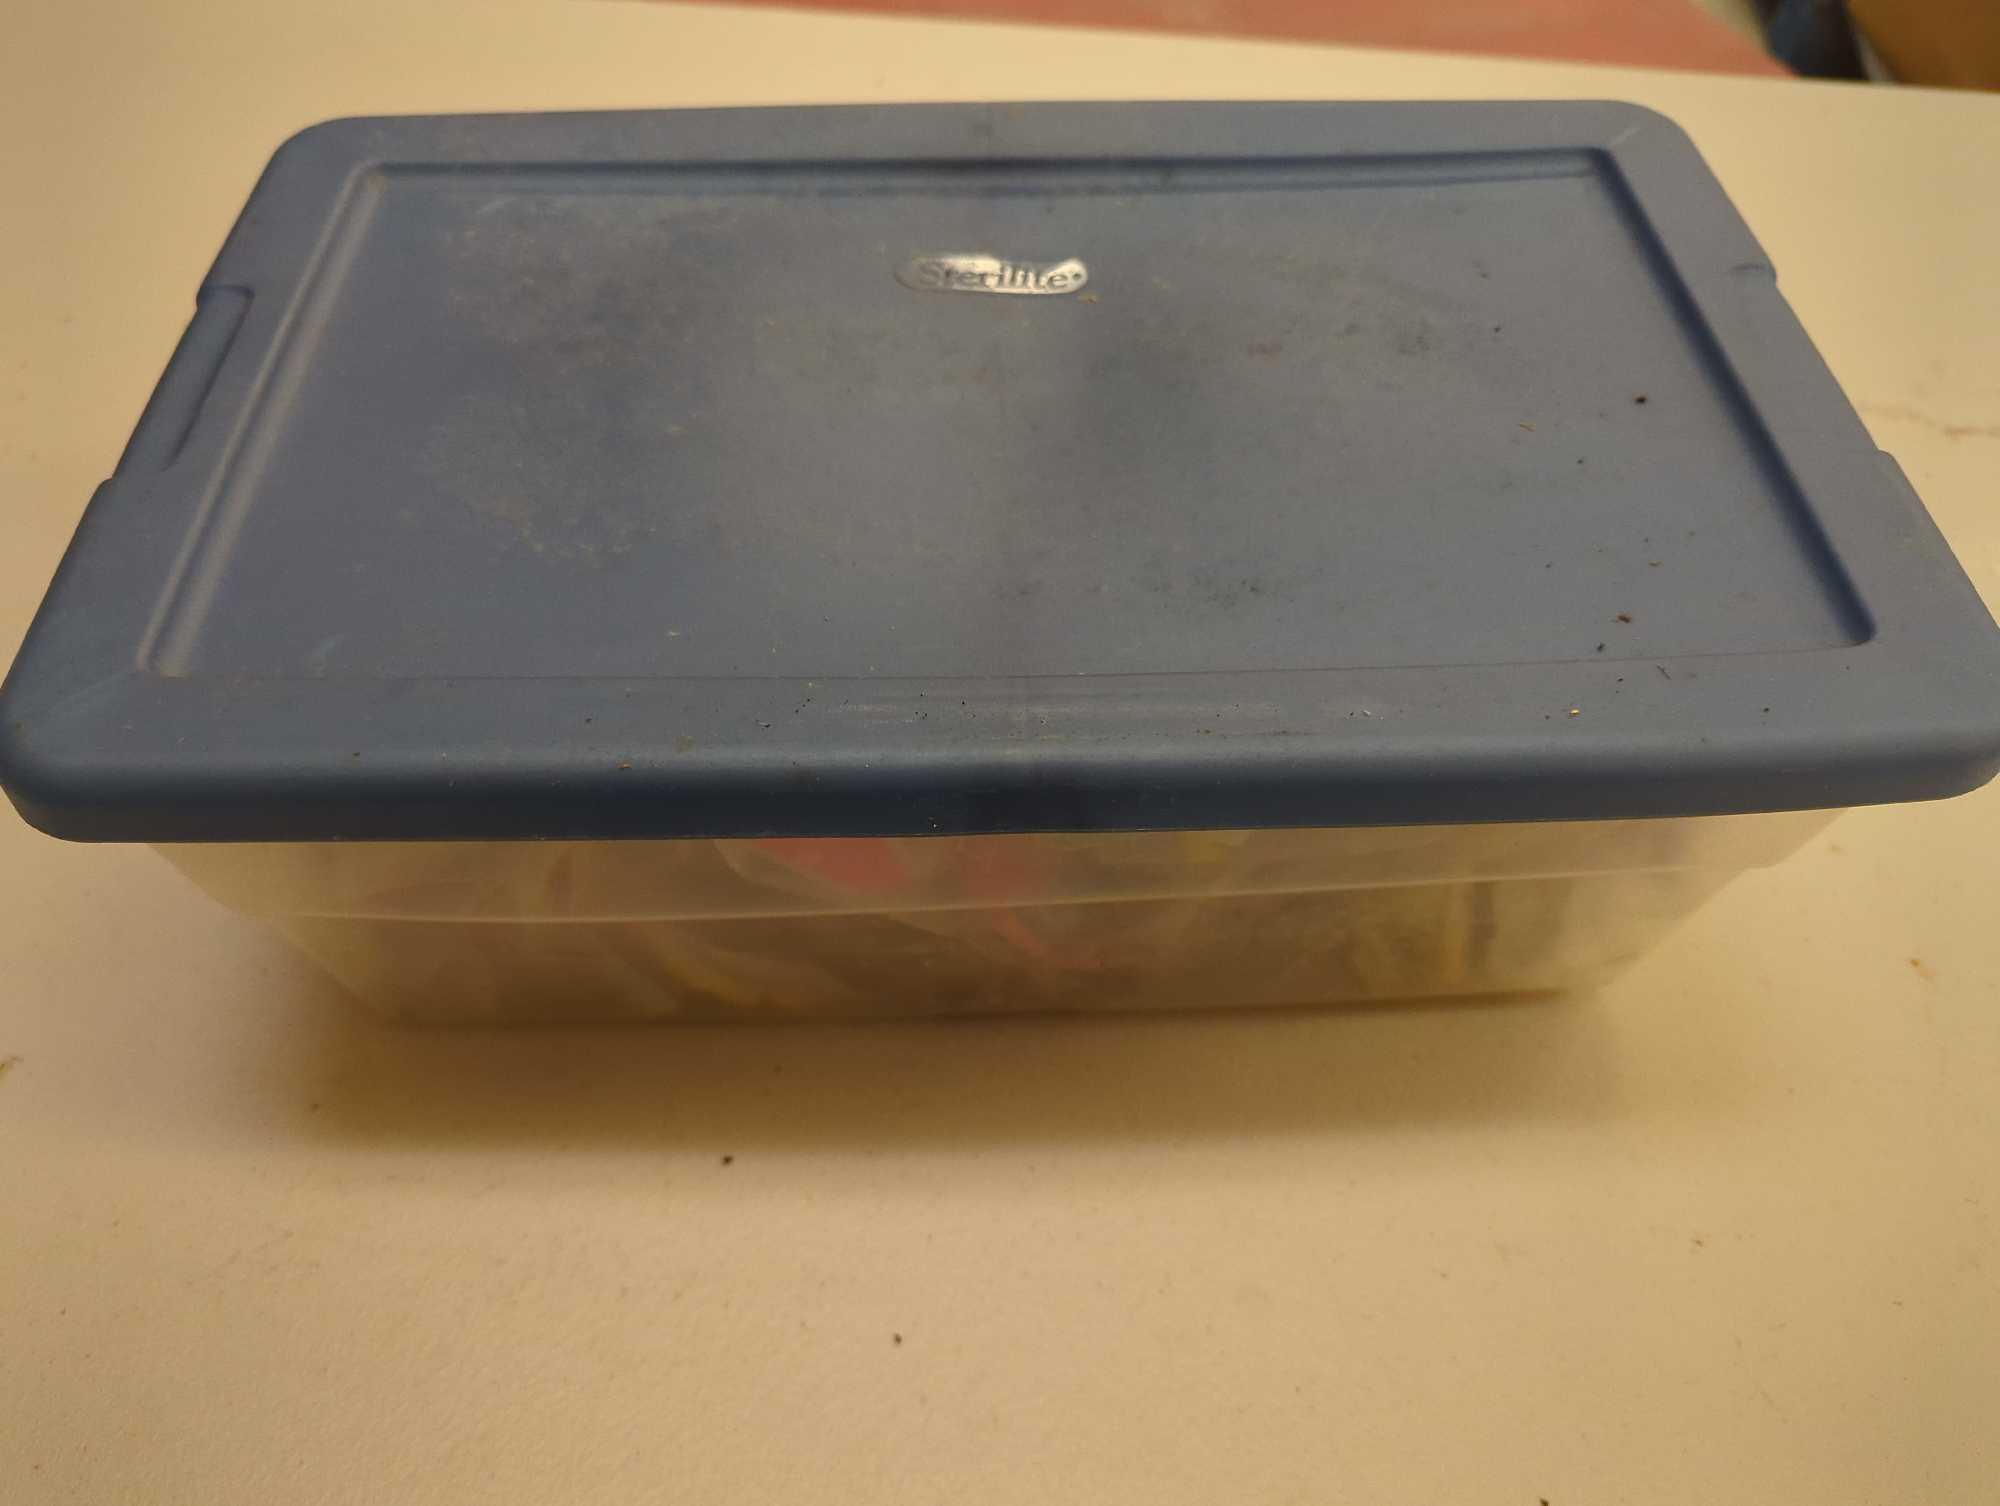 Blue Sterilite organizer tote and contents including worms and other various fishing lures. Comes as